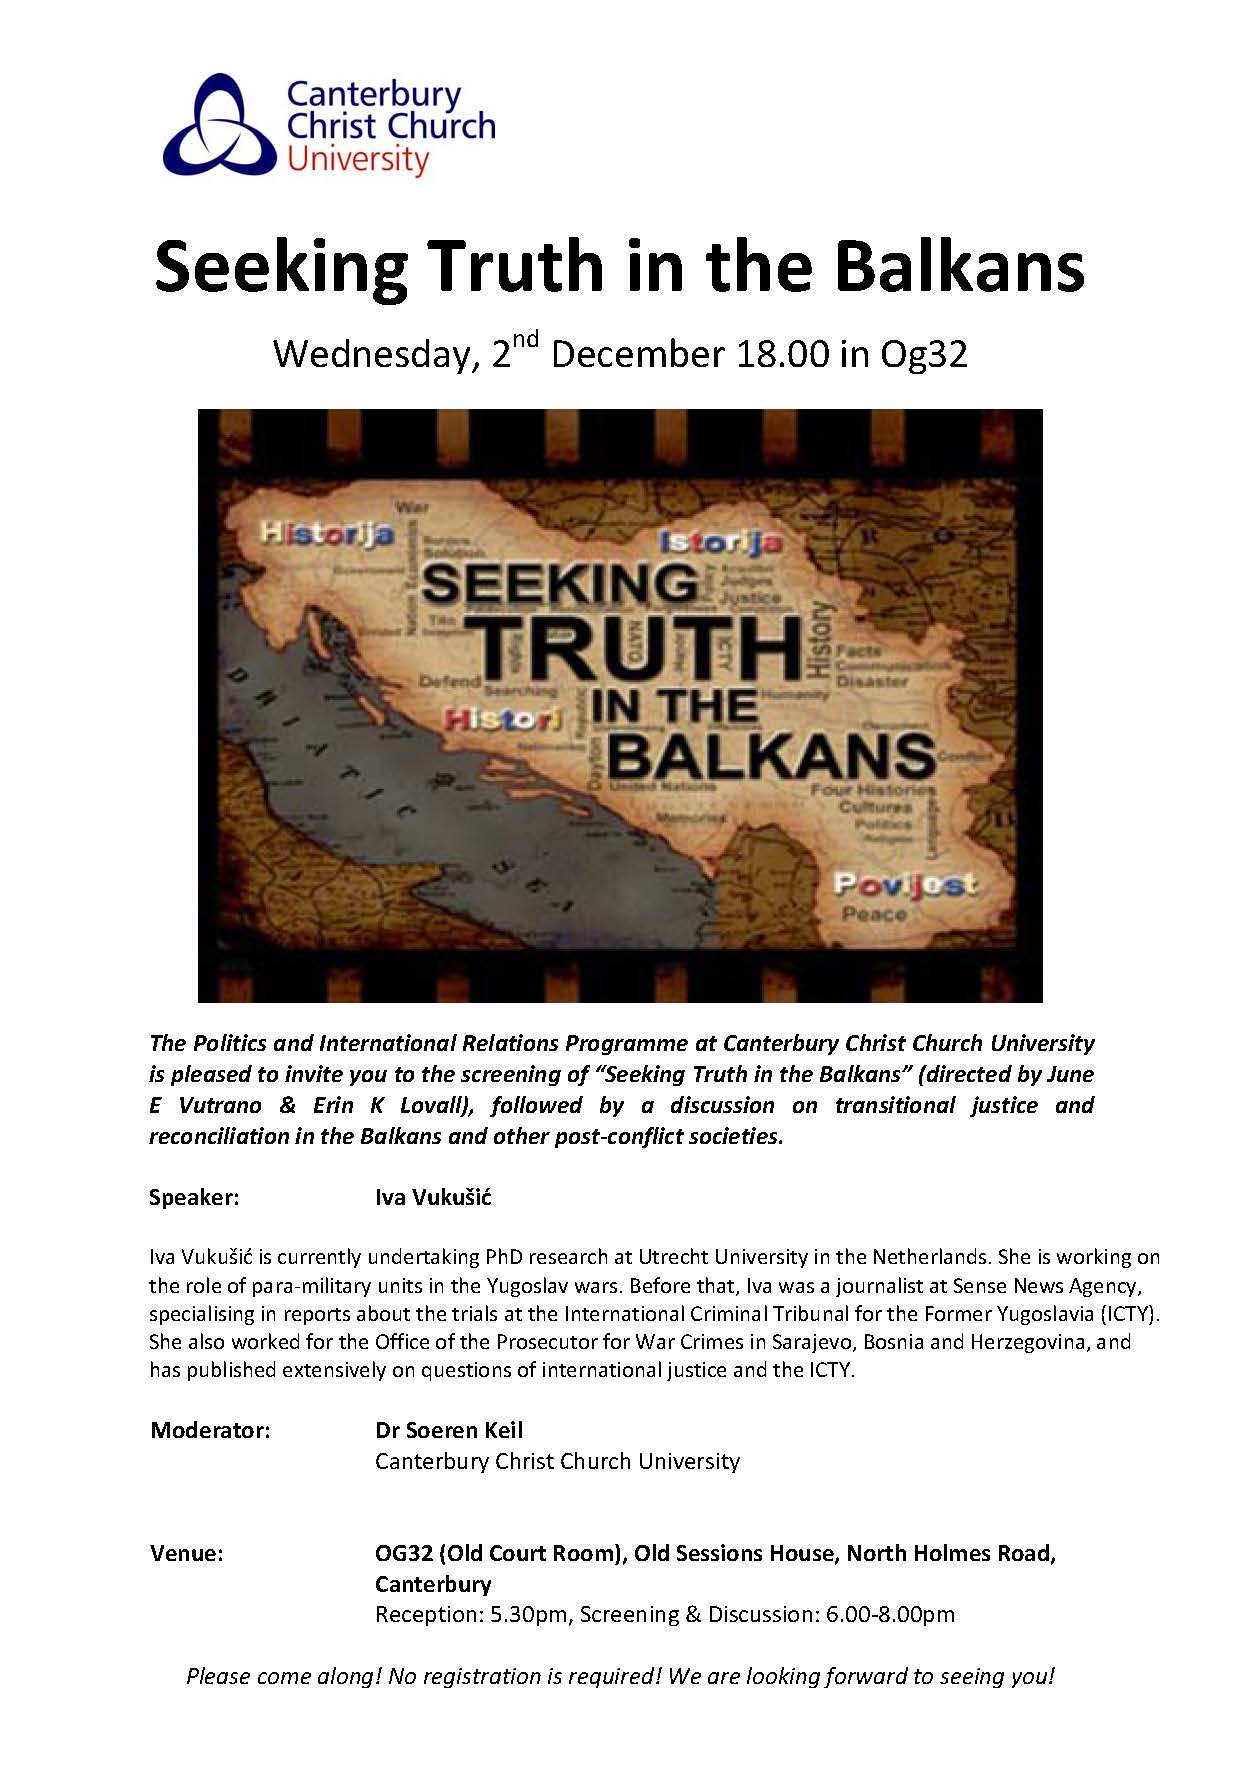 Seeking Truth in the Balkans event